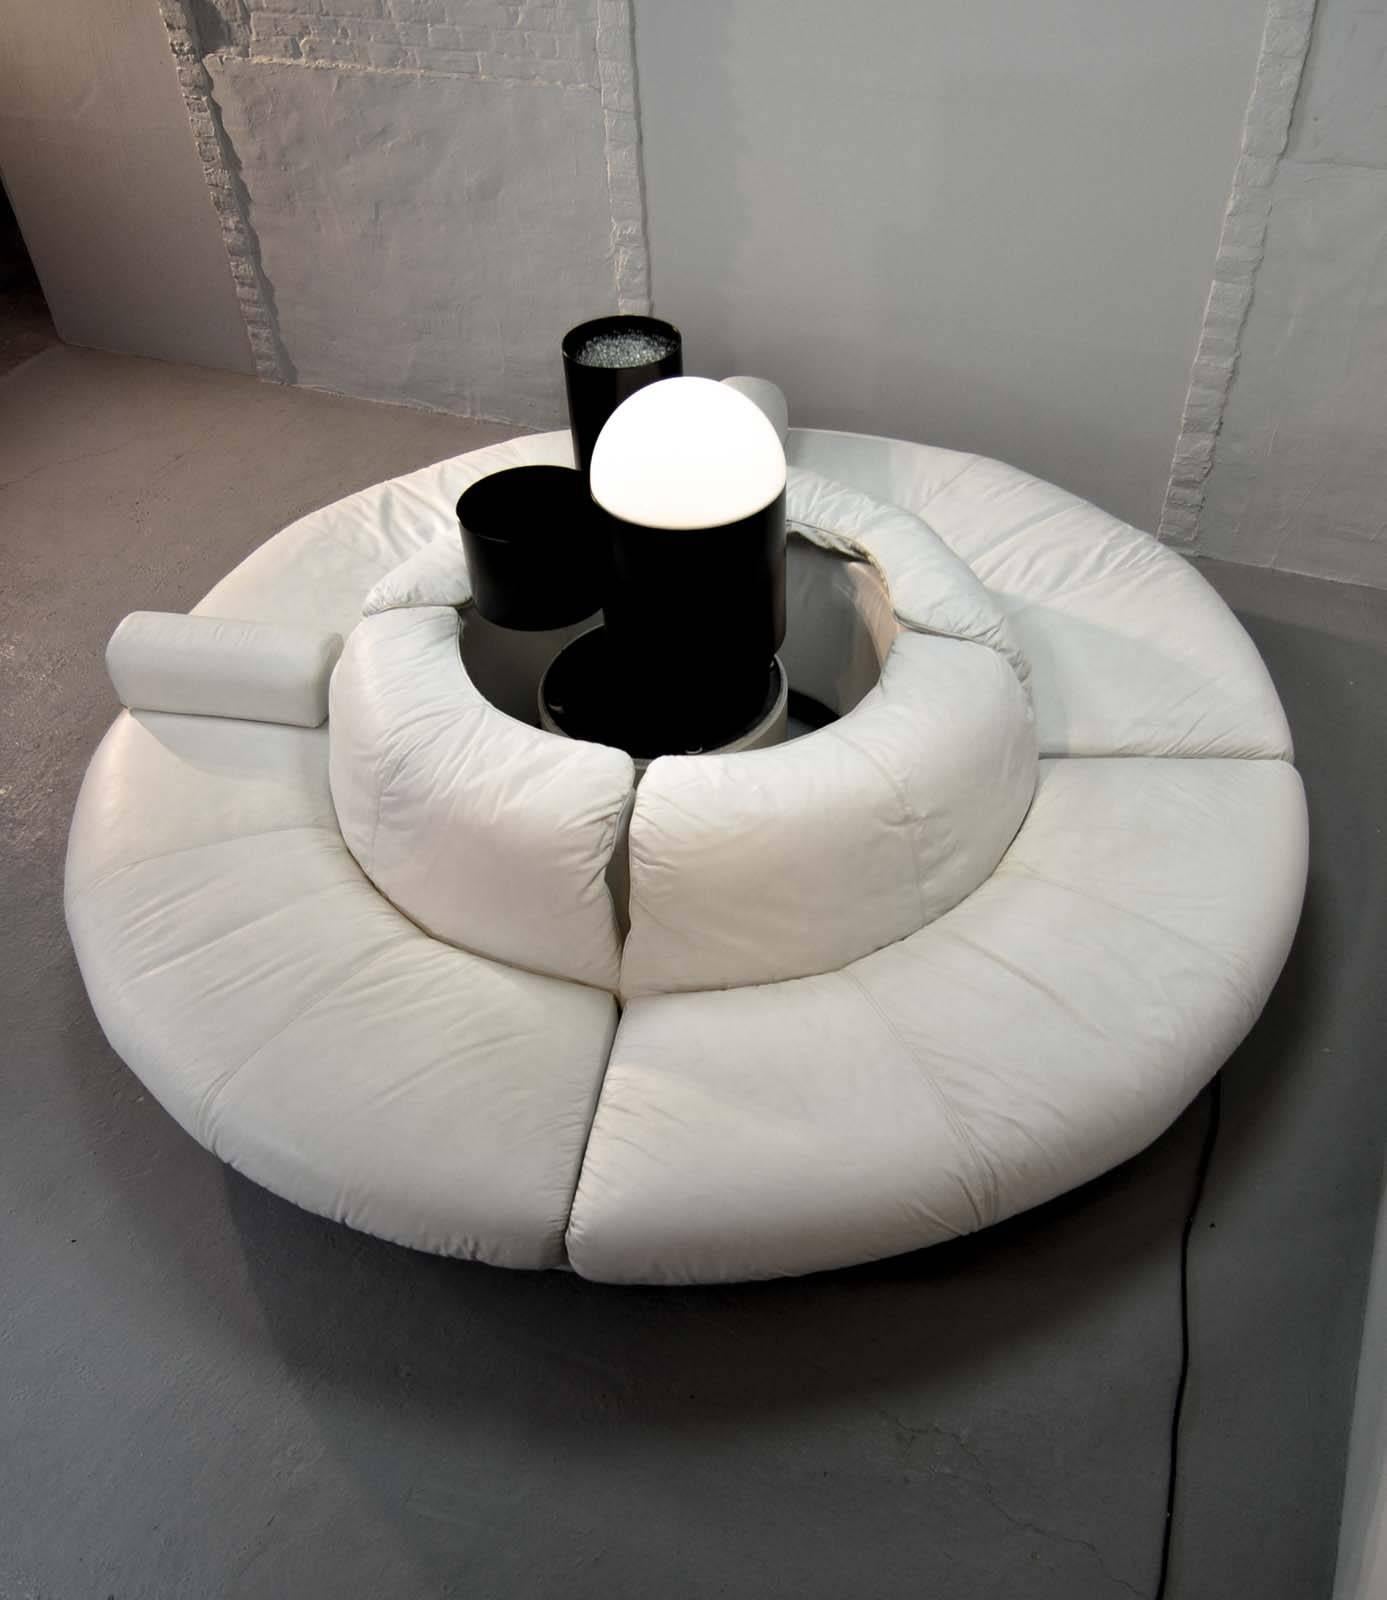 Rare and fantastic circular white leather sectional Italian sofa. This sofa consists of four identical quarter elements in a soft white leather upholstery. The four elements can be applied as stand alone sofas, but make a stronger appearance as a